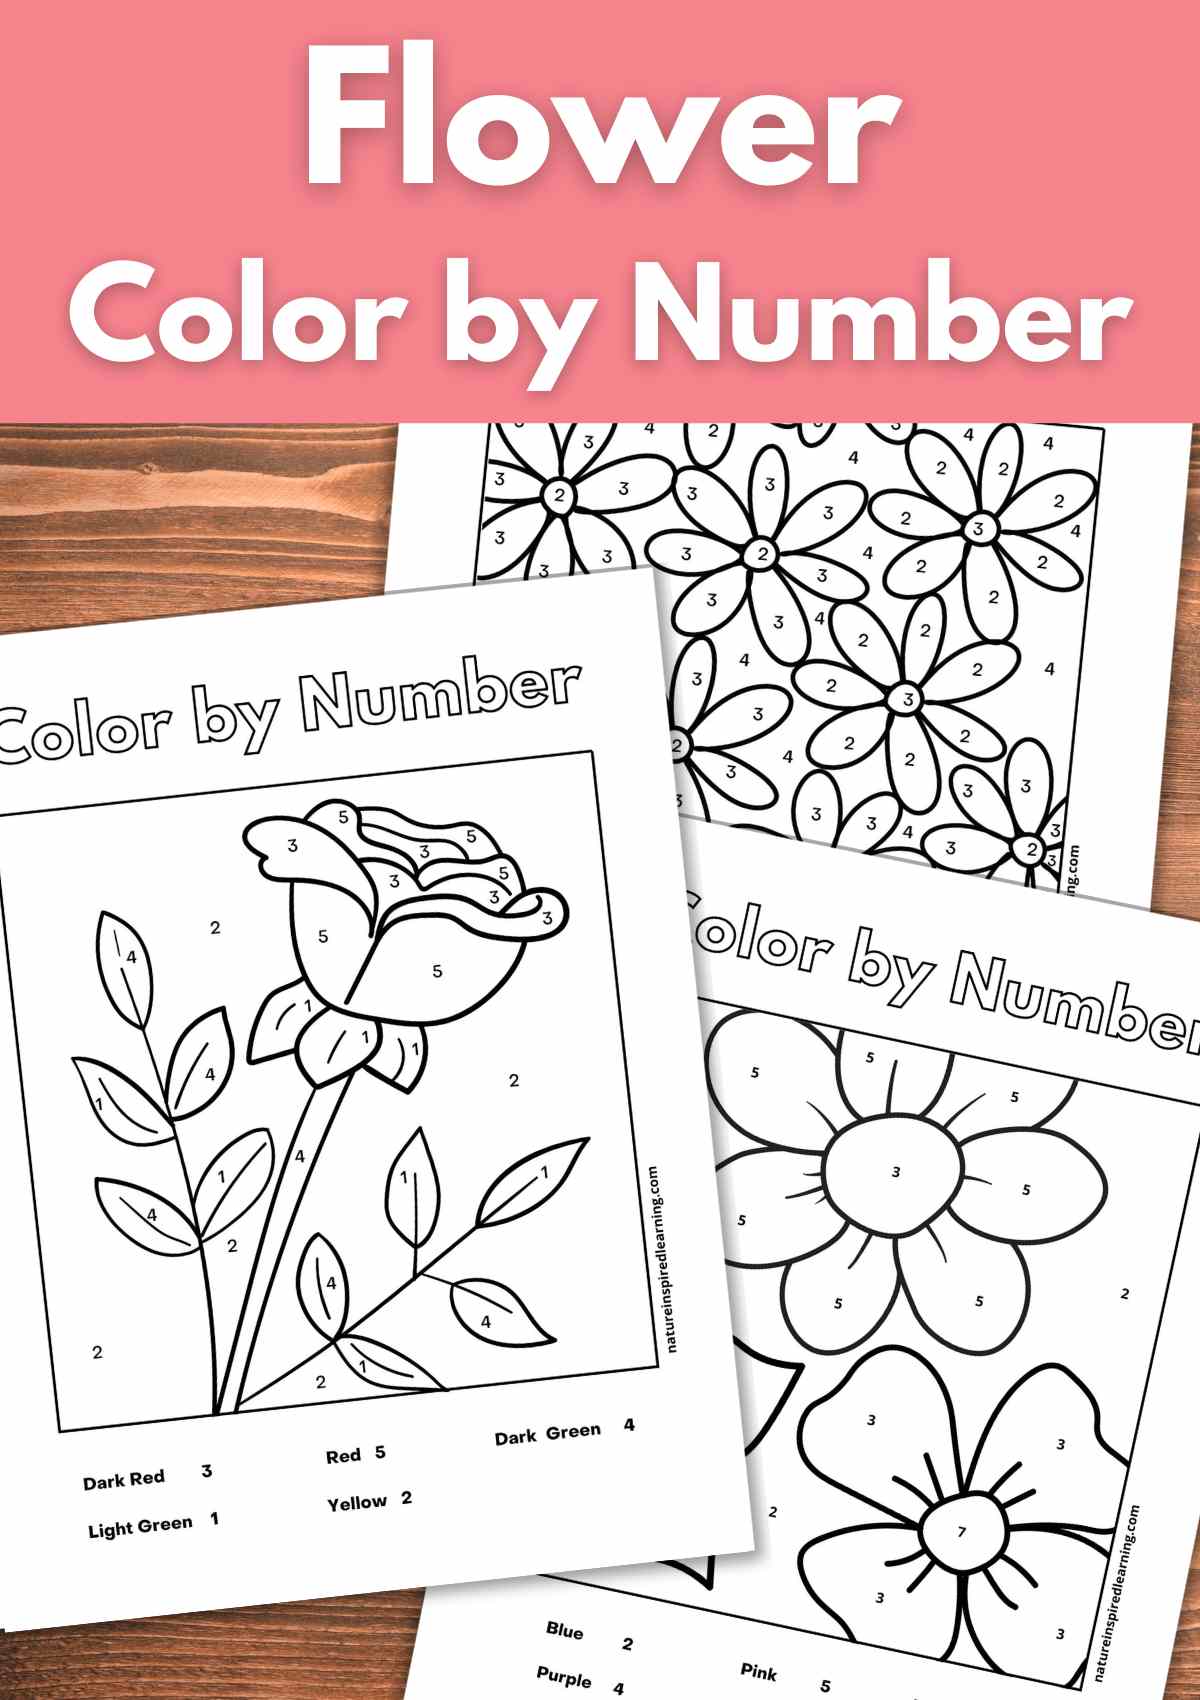 Flowers Color by number for kids ages 8-12: Flower color by number